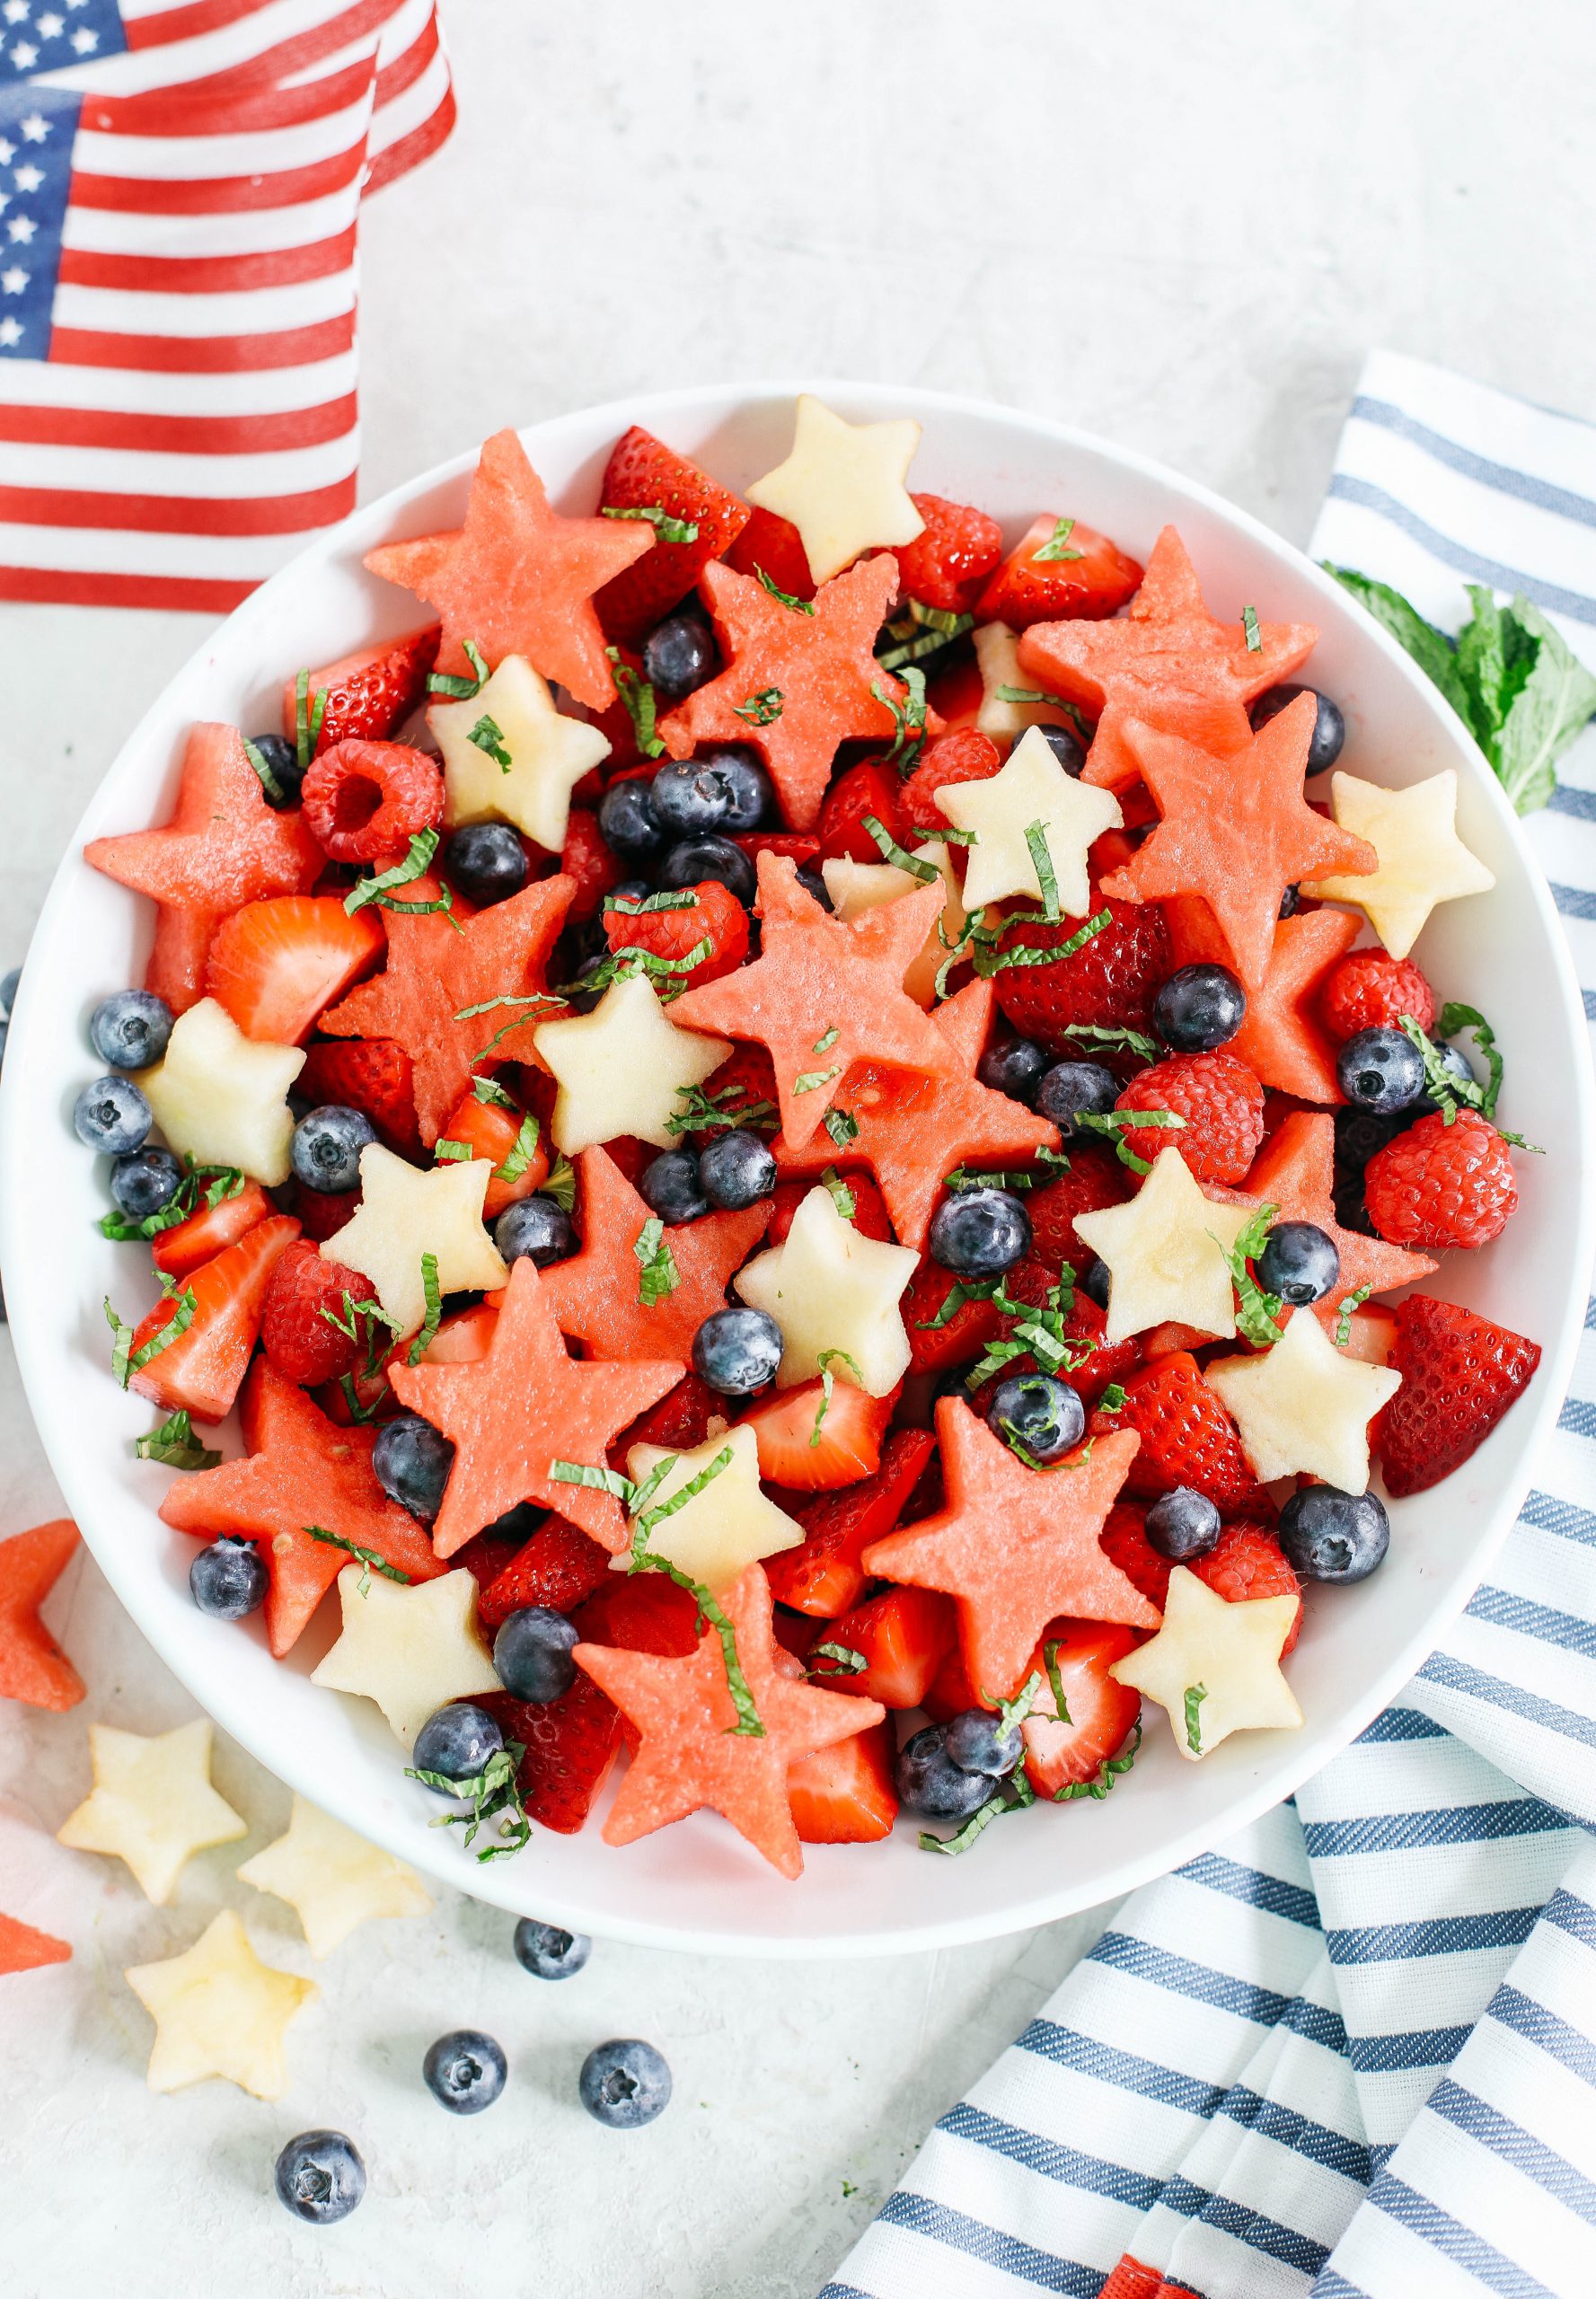 Kick off the 4th of July weekend with this fresh and festive Red, White and Blueberry Fruit Salad packed juicy watermelon, crisp apples and delicious berries all tossed together in a honey-citrus dressing!